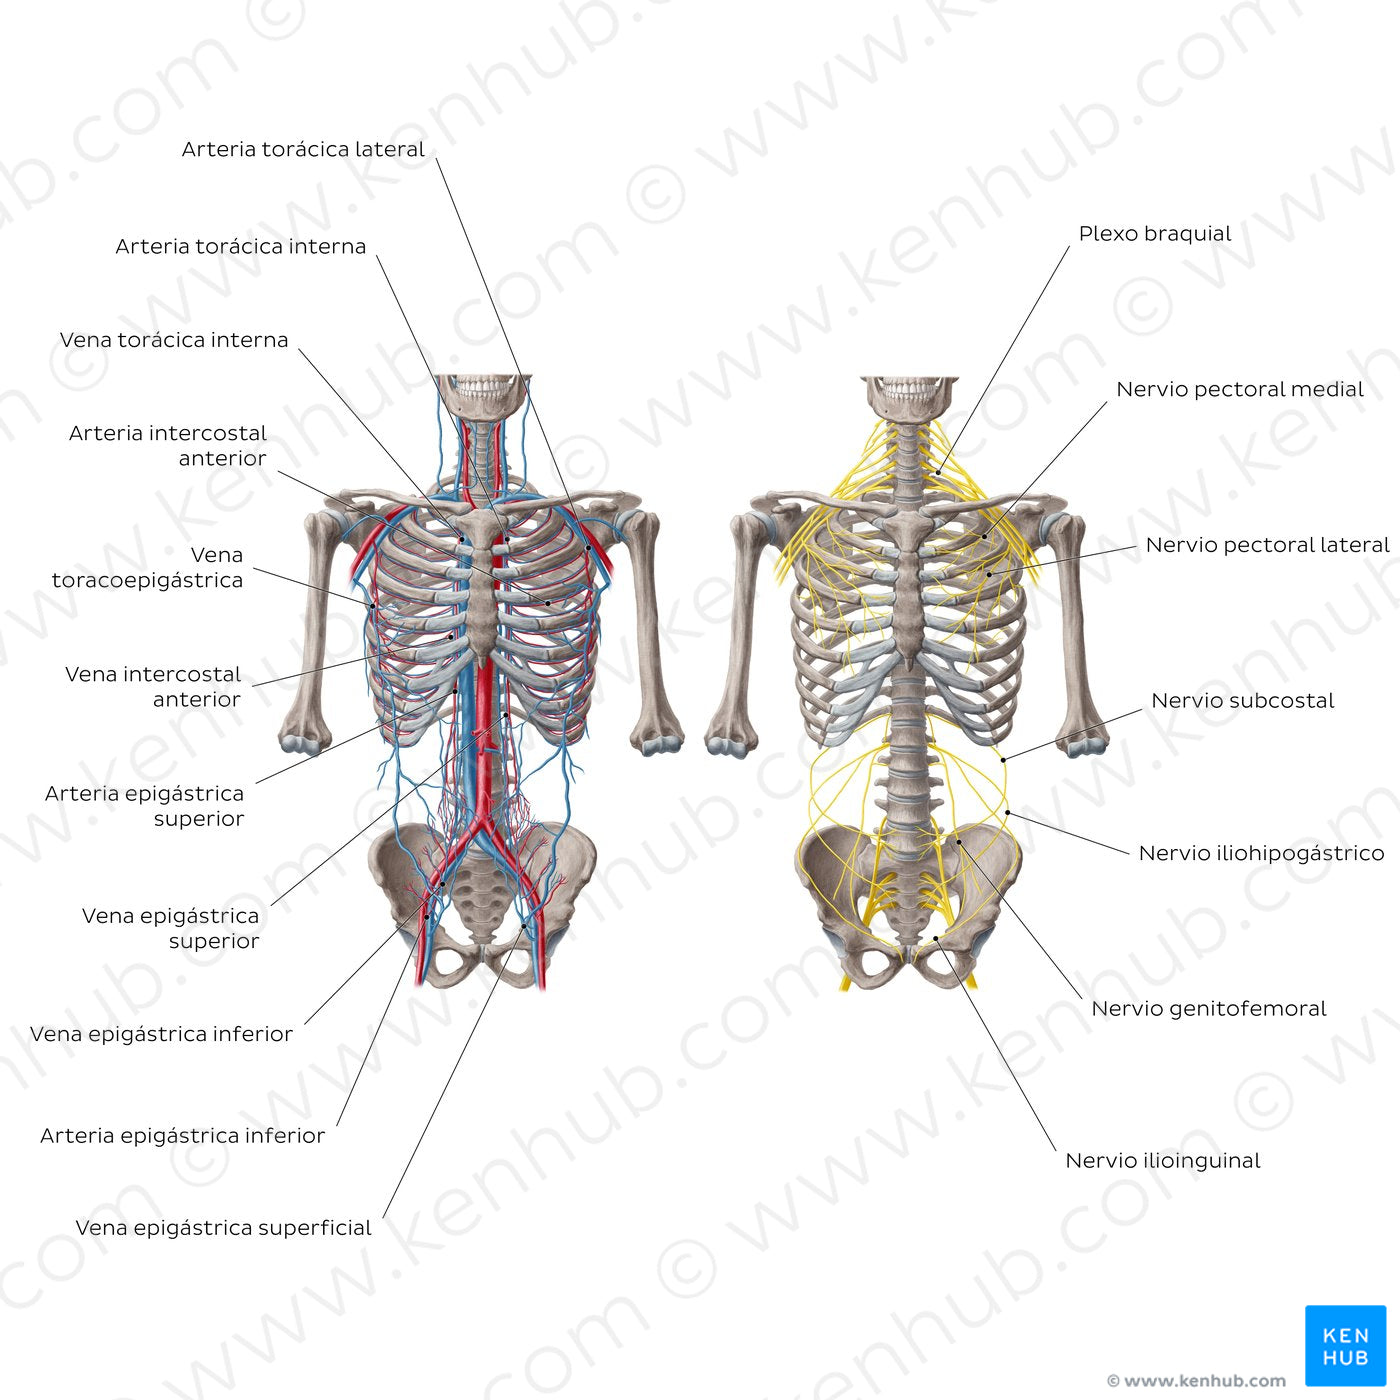 Nerves and vessels of the abdominal wall (Spanish)